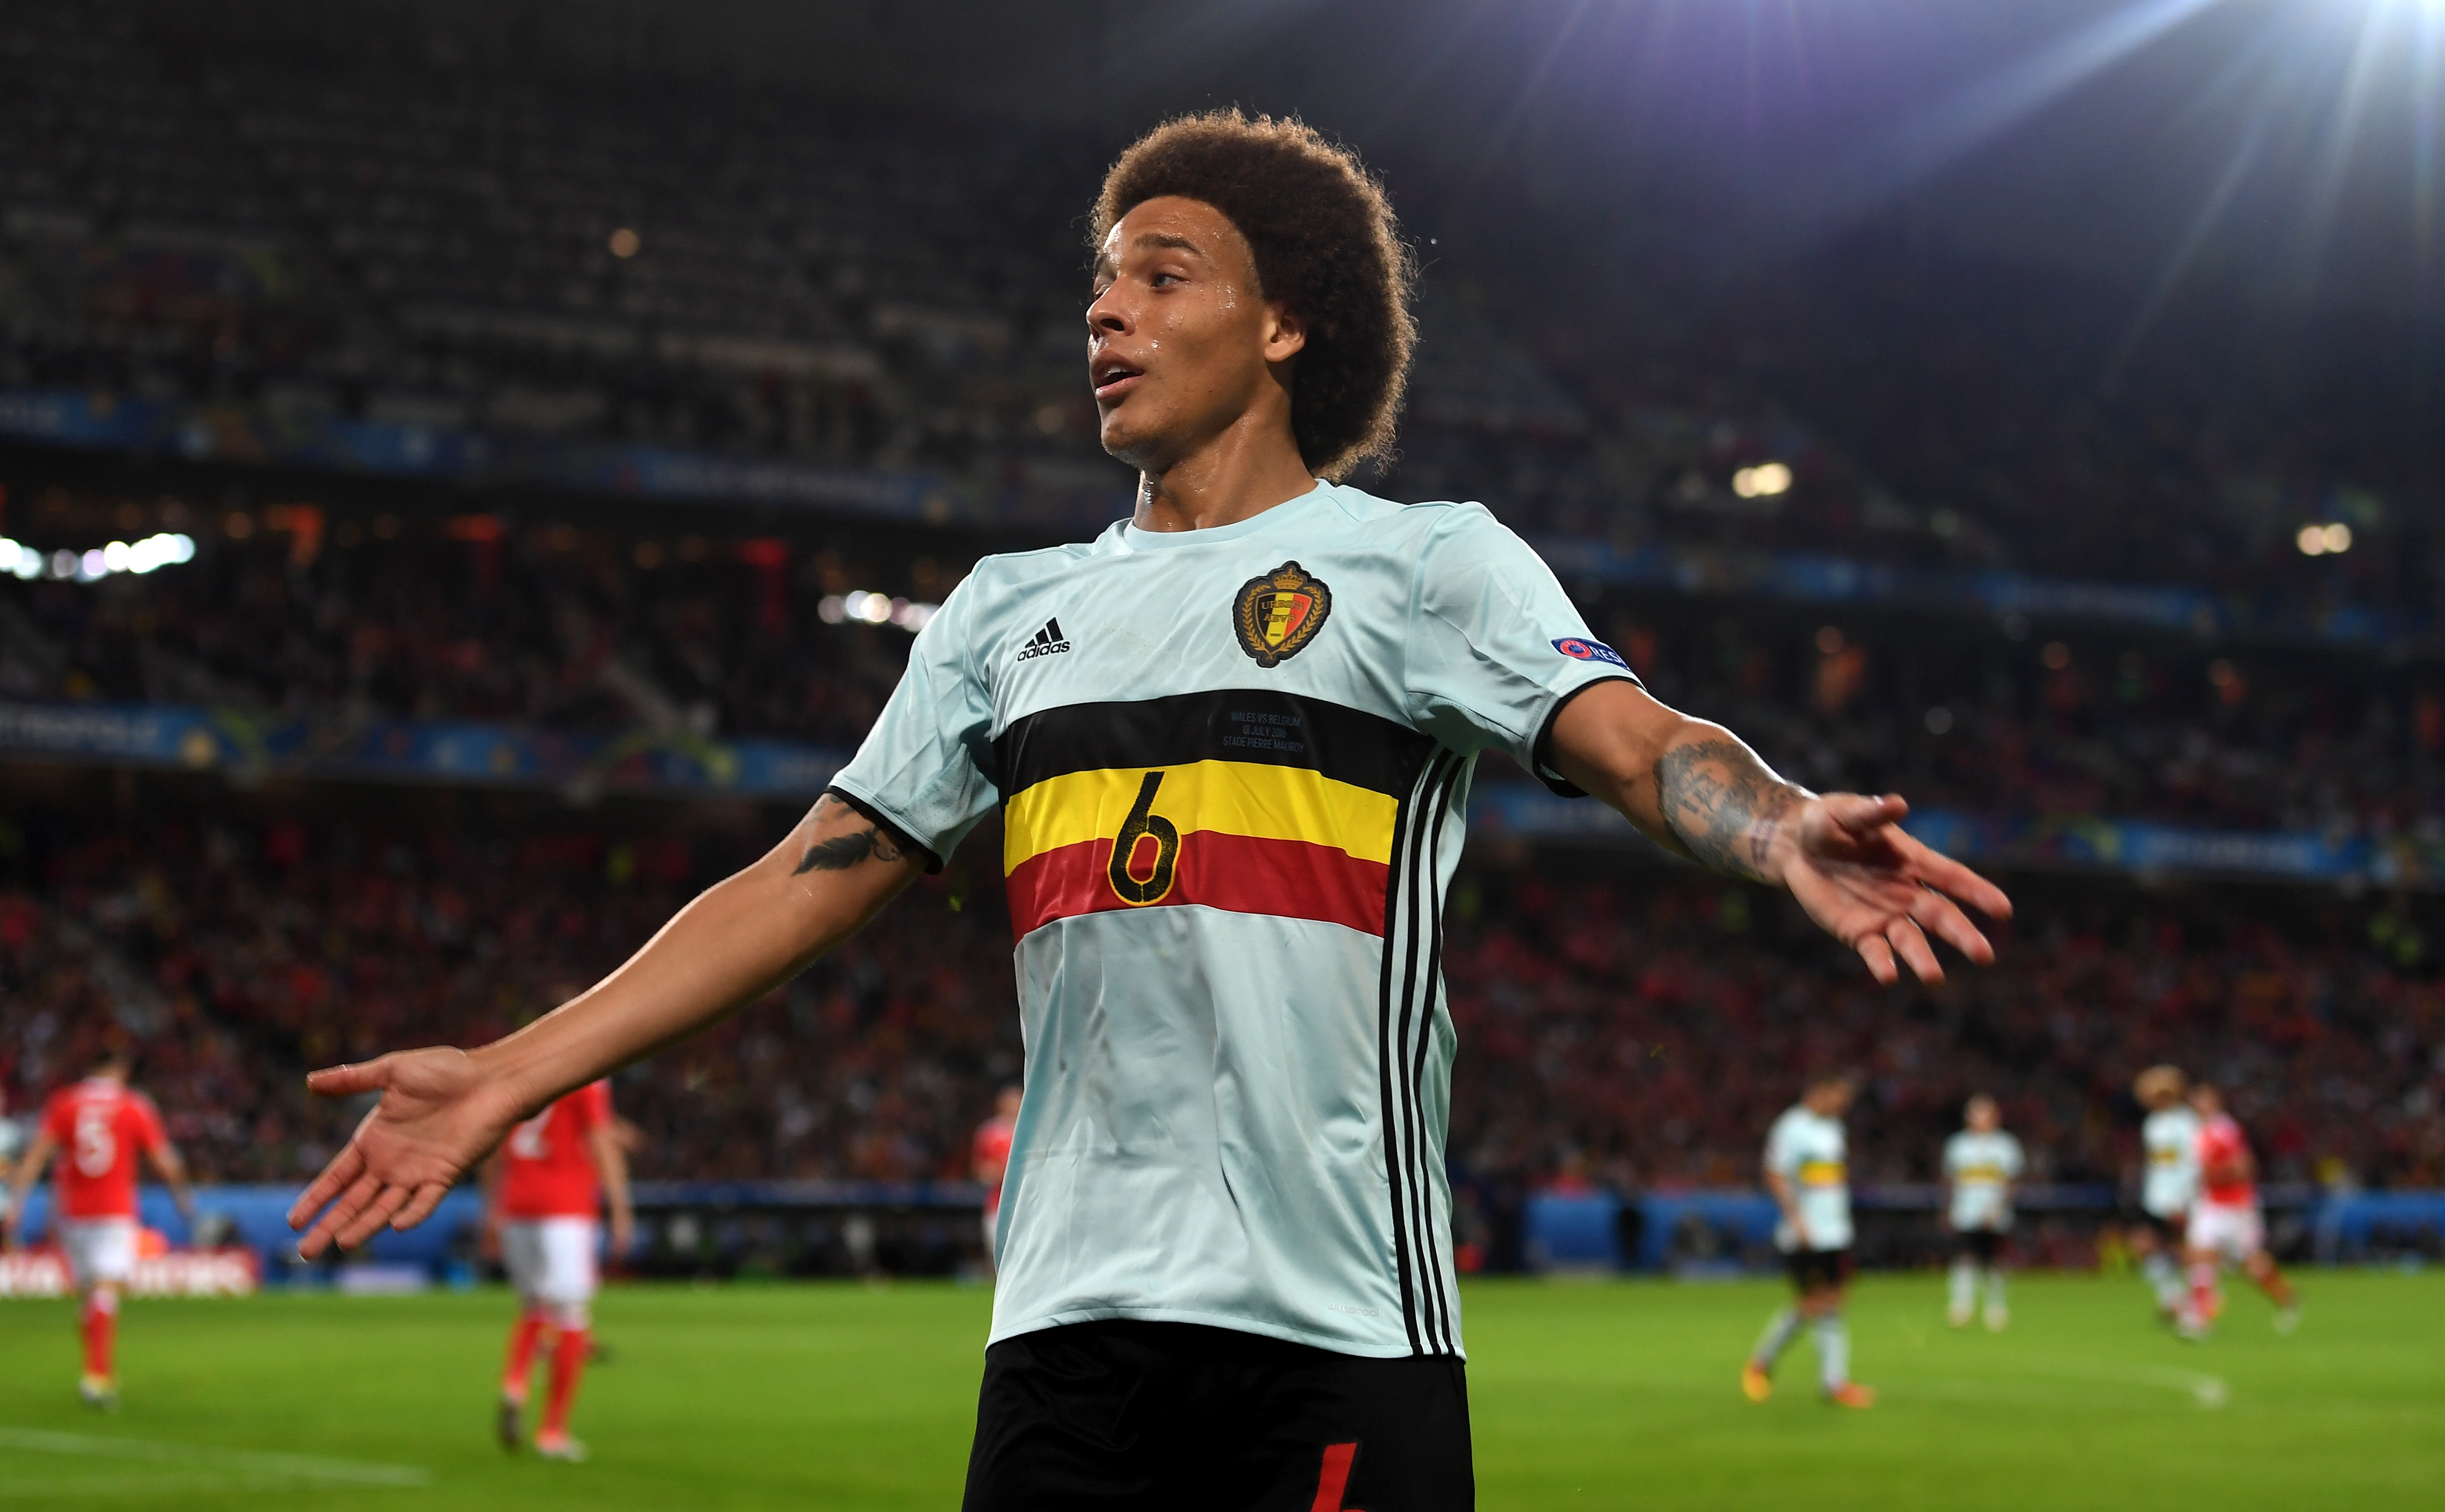 LILLE, FRANCE - JULY 01:  Axel Witsel of Belgium gestures action during the UEFA EURO 2016 quarter final match between Wales and Belgium at Stade Pierre-Mauroy on July 1, 2016 in Lille, France.  (Photo by Michael Regan/Getty Images)